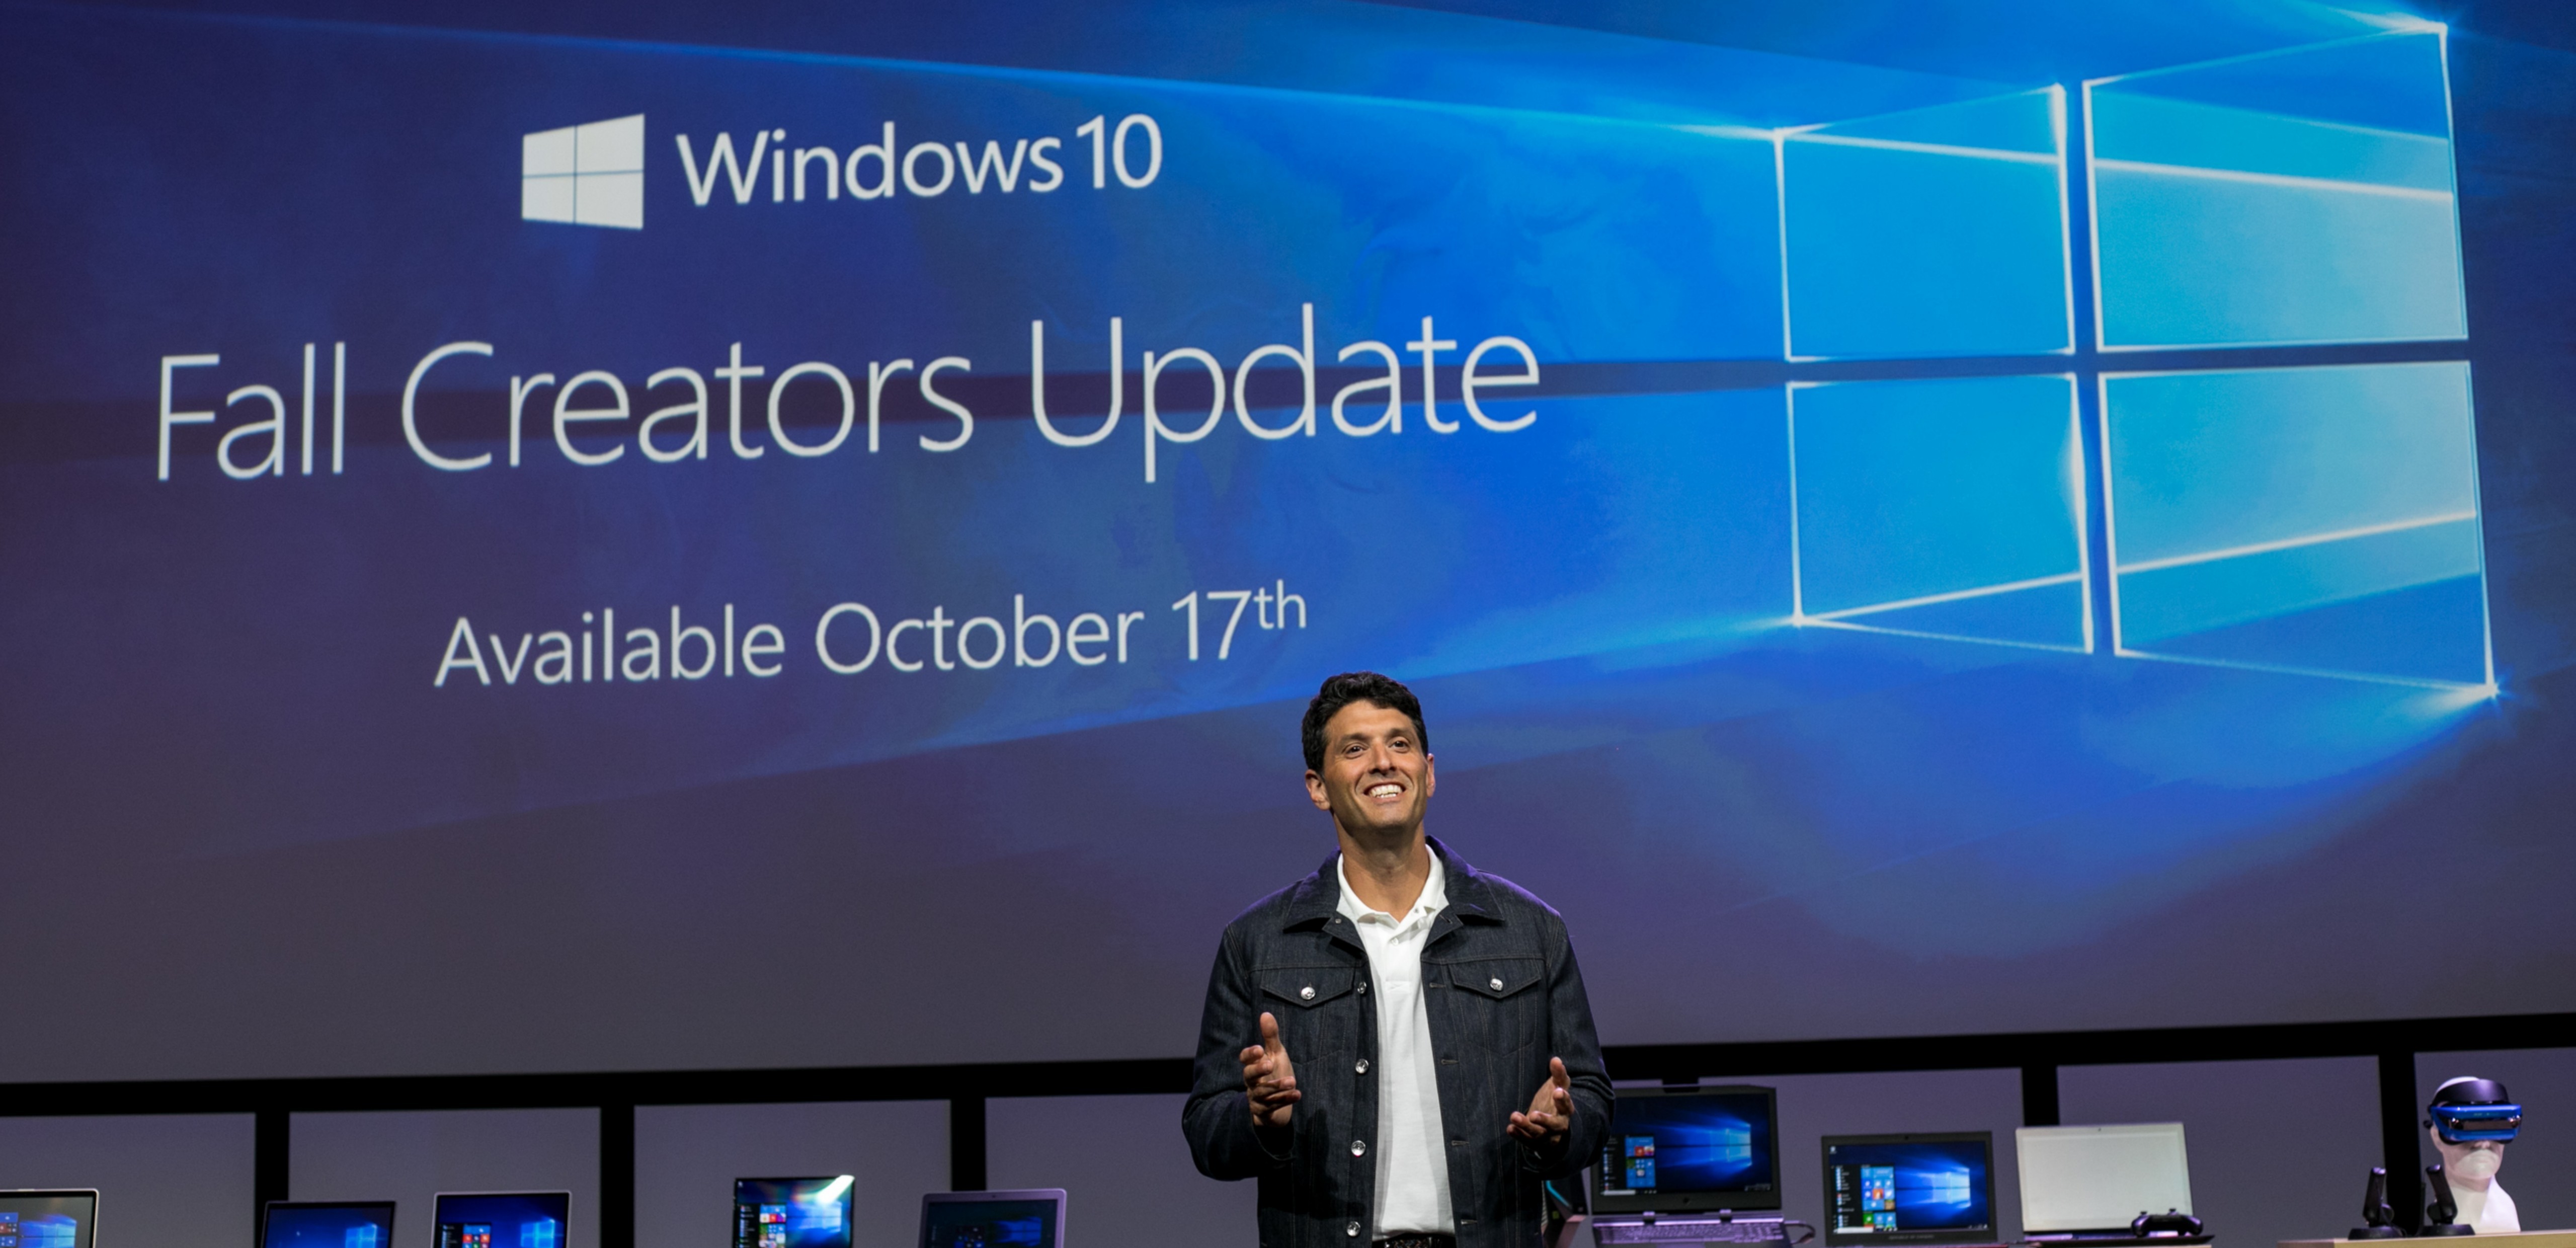 Terry Myerson announces the release of the Windows 10 Fall Creators Update